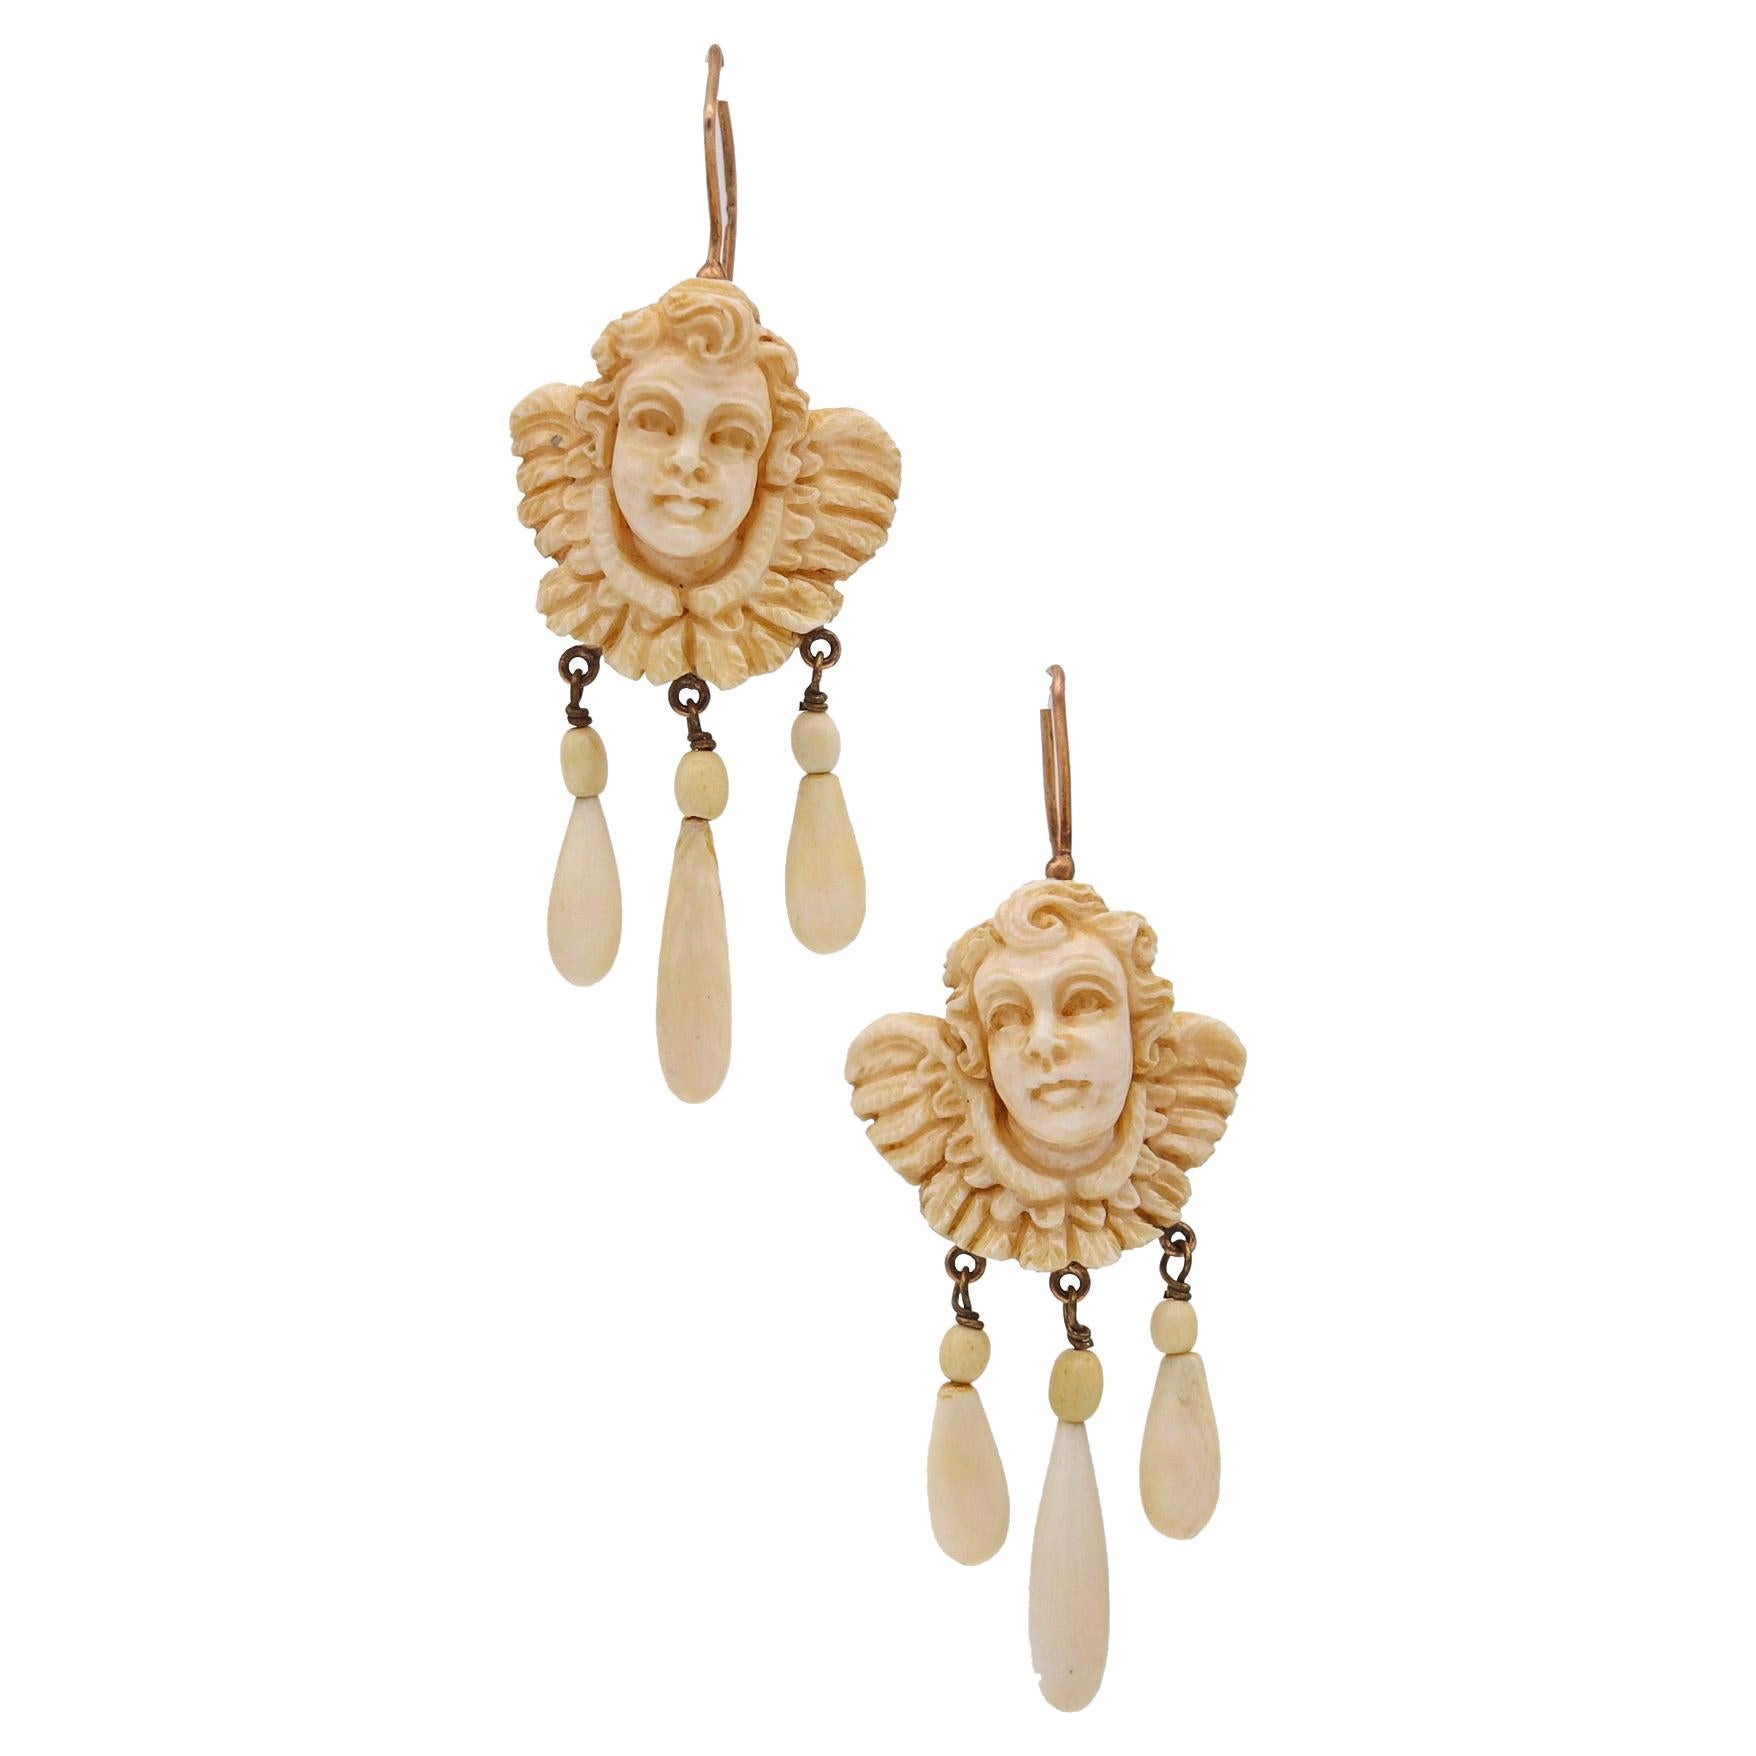 French 1820 Pair of Dangle Drop Earrings in 18Kt Gold with Cherubs Carvings For Sale